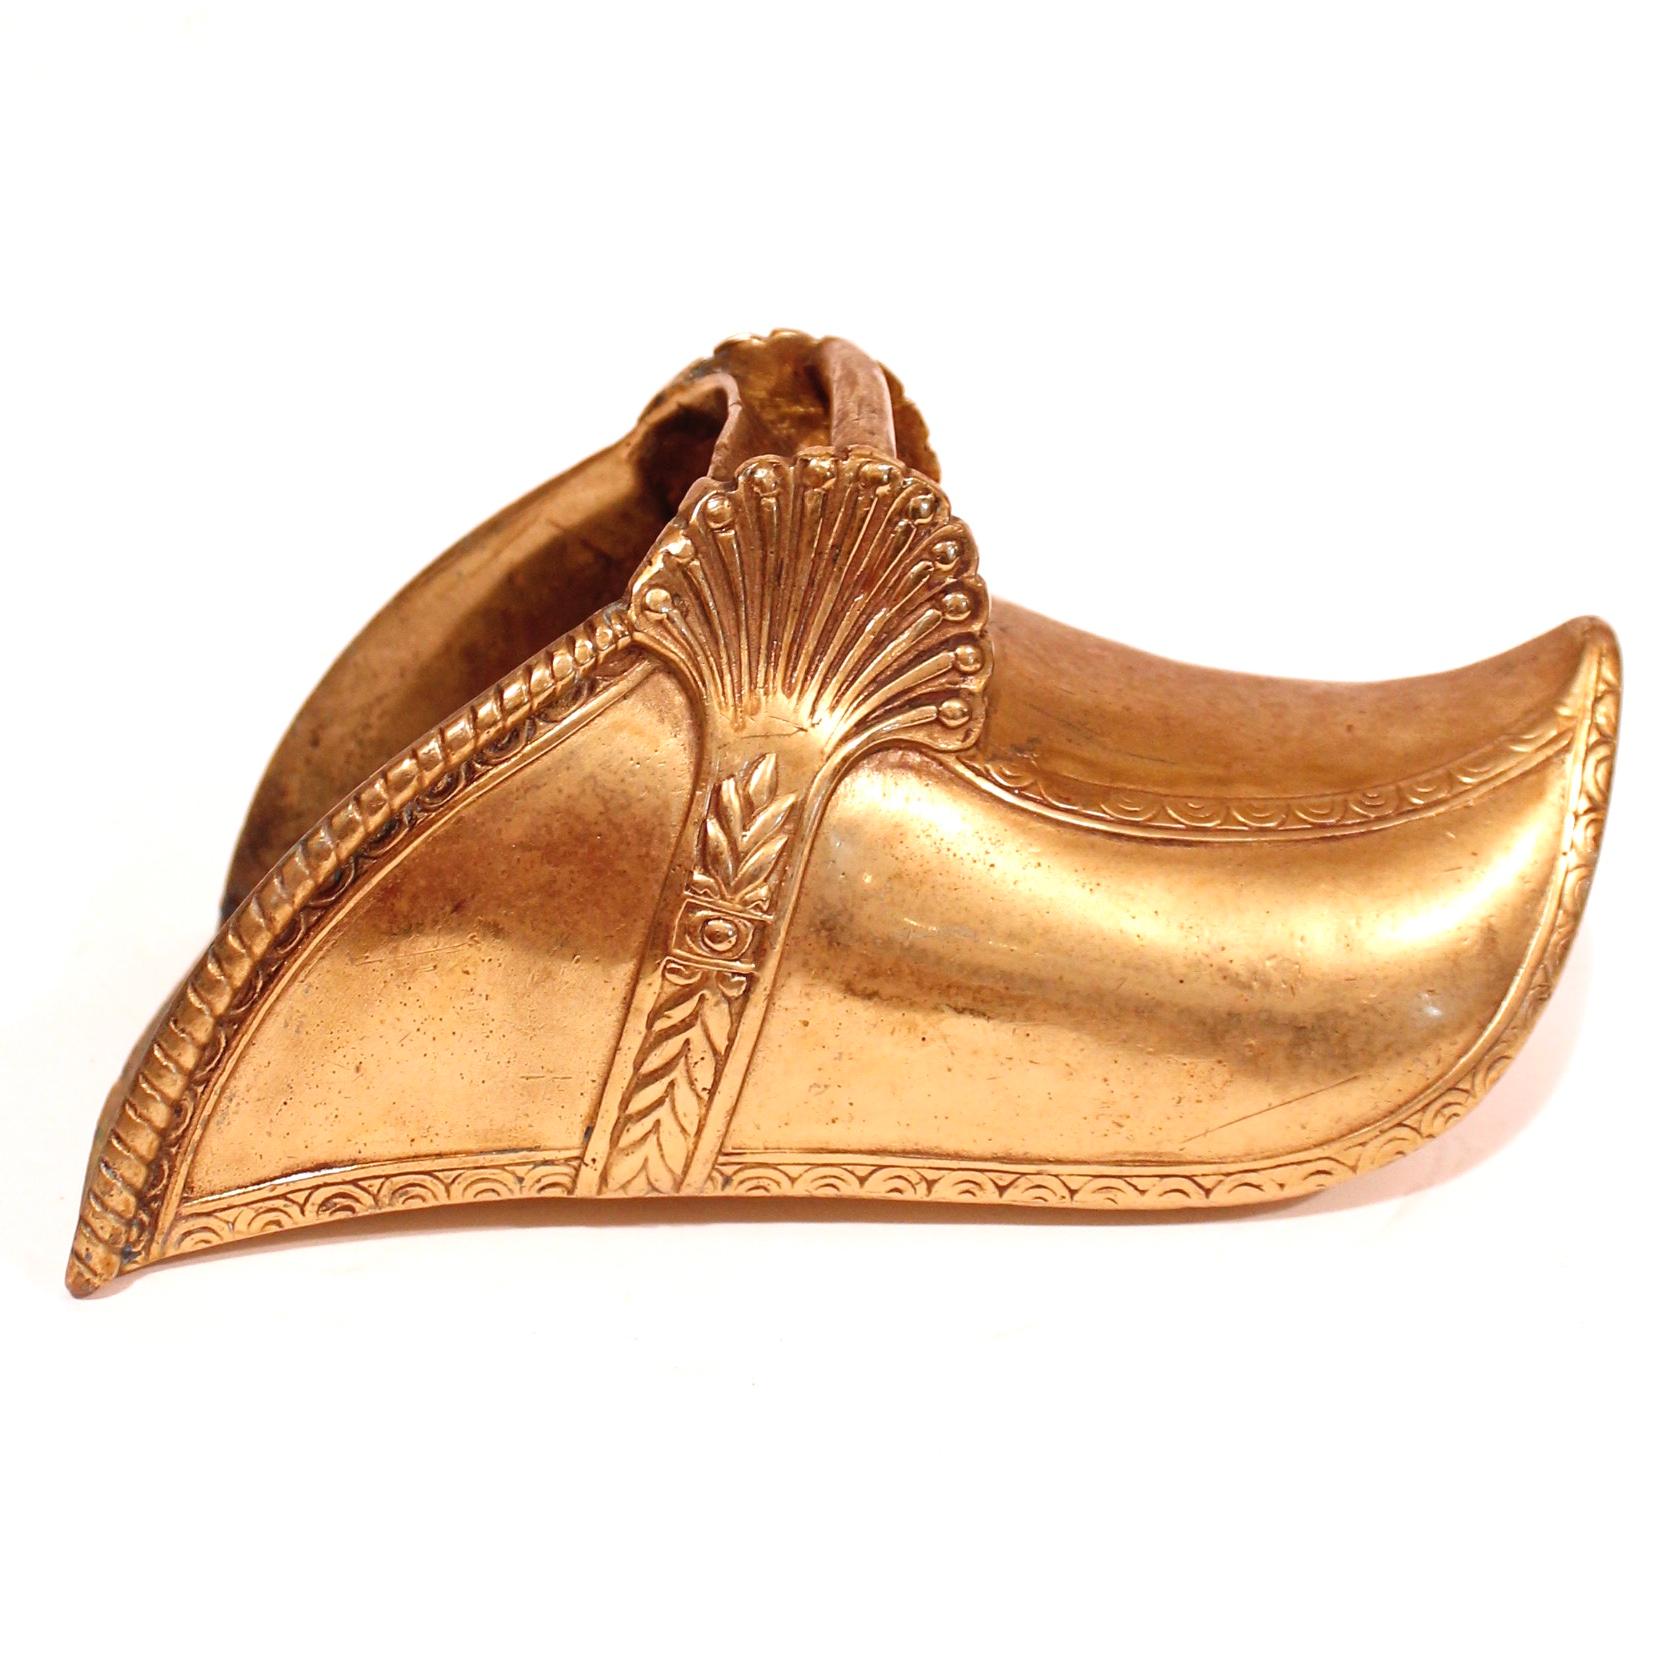 Pair Of Brass Stirrups, 19th Century, Spanish Colonial In Good Condition For Sale In Free Union, VA